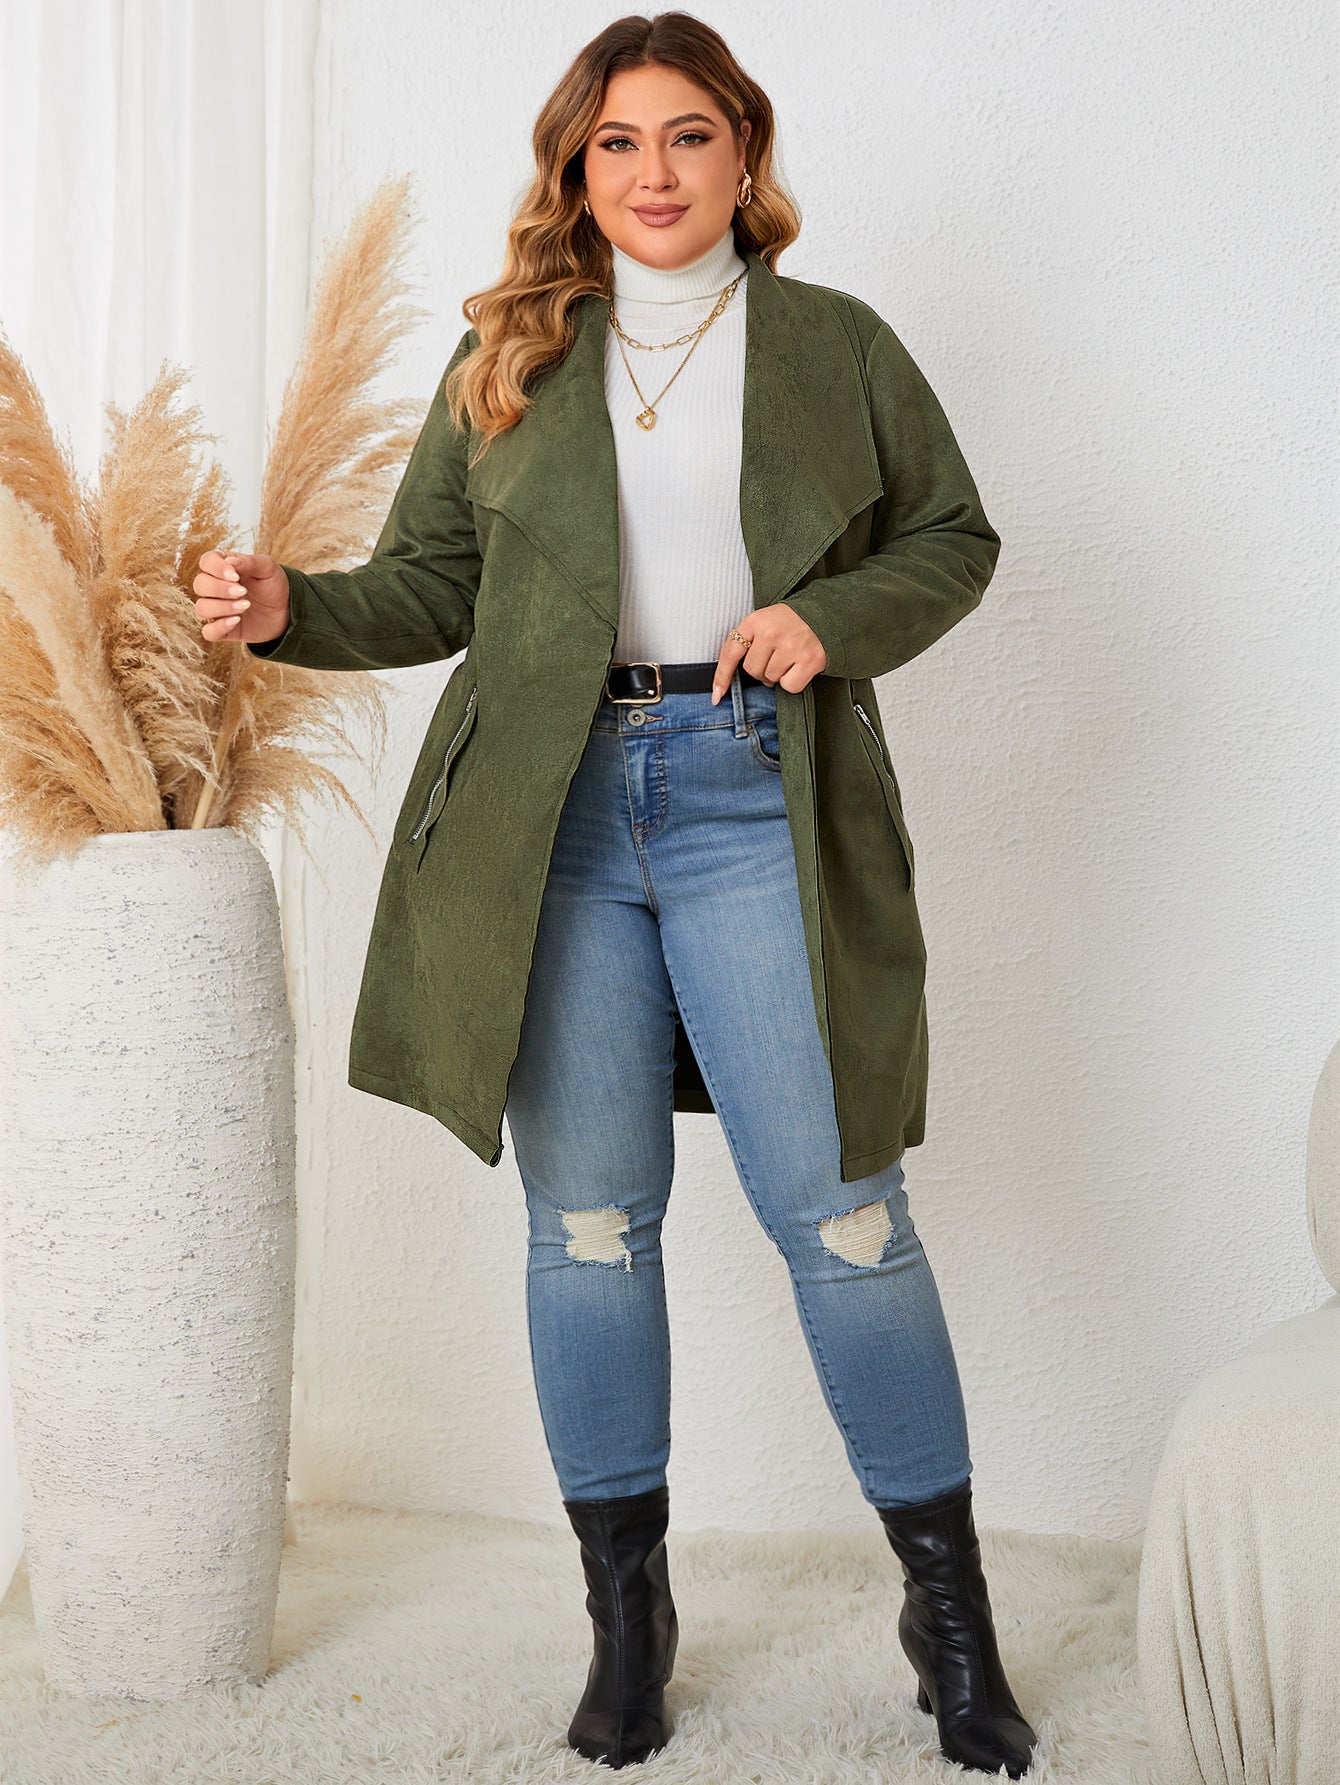 Plus Size Cardigan Sweaters for Women